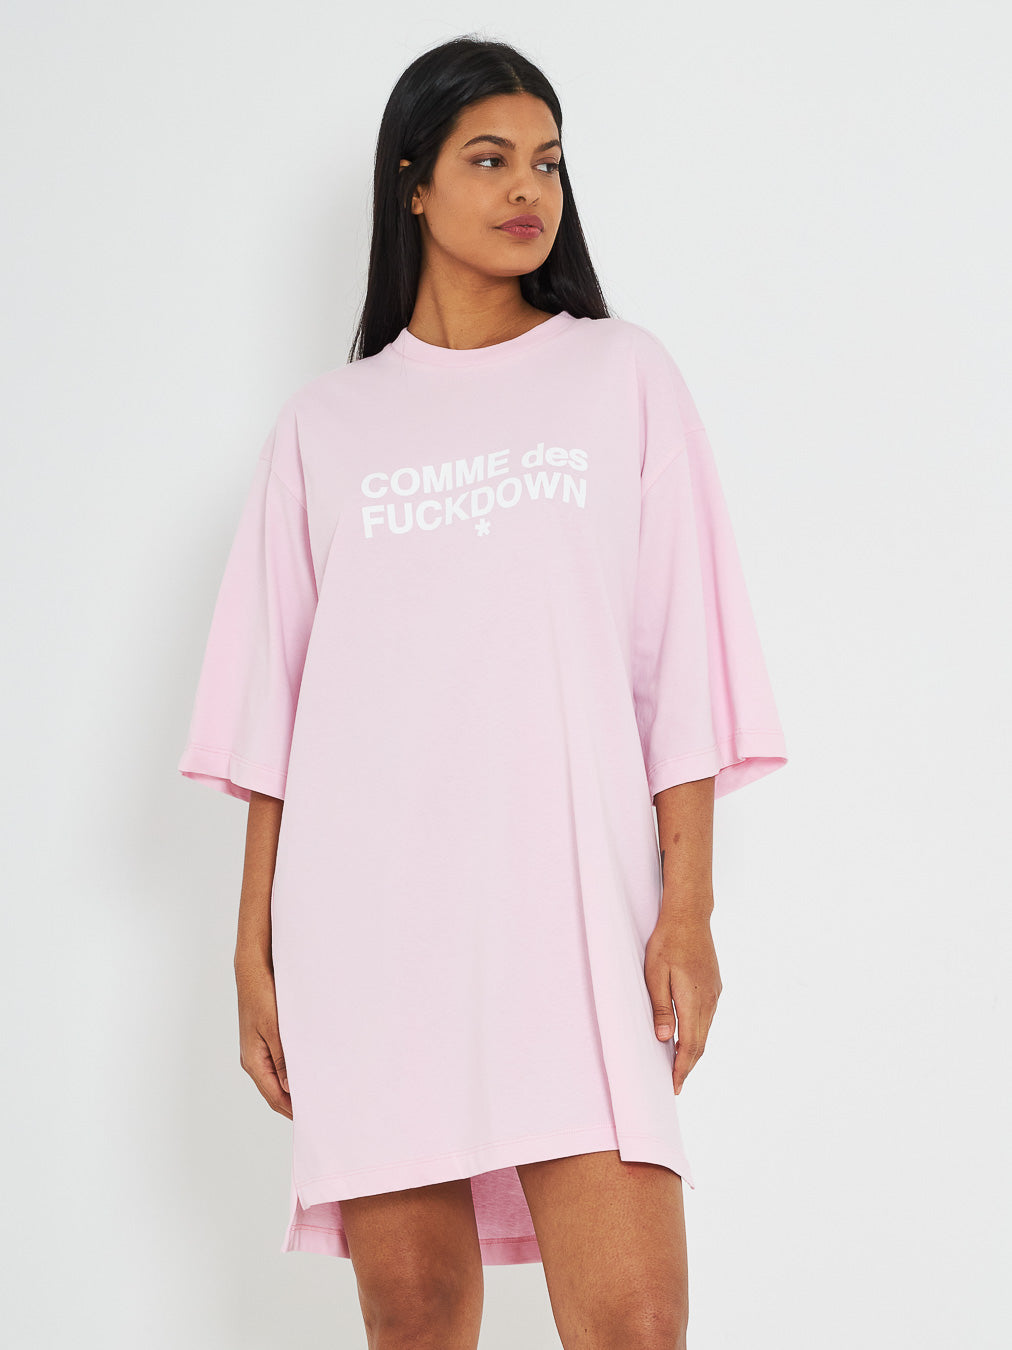 Comme Des Fuckdown pink t shirt dress with print